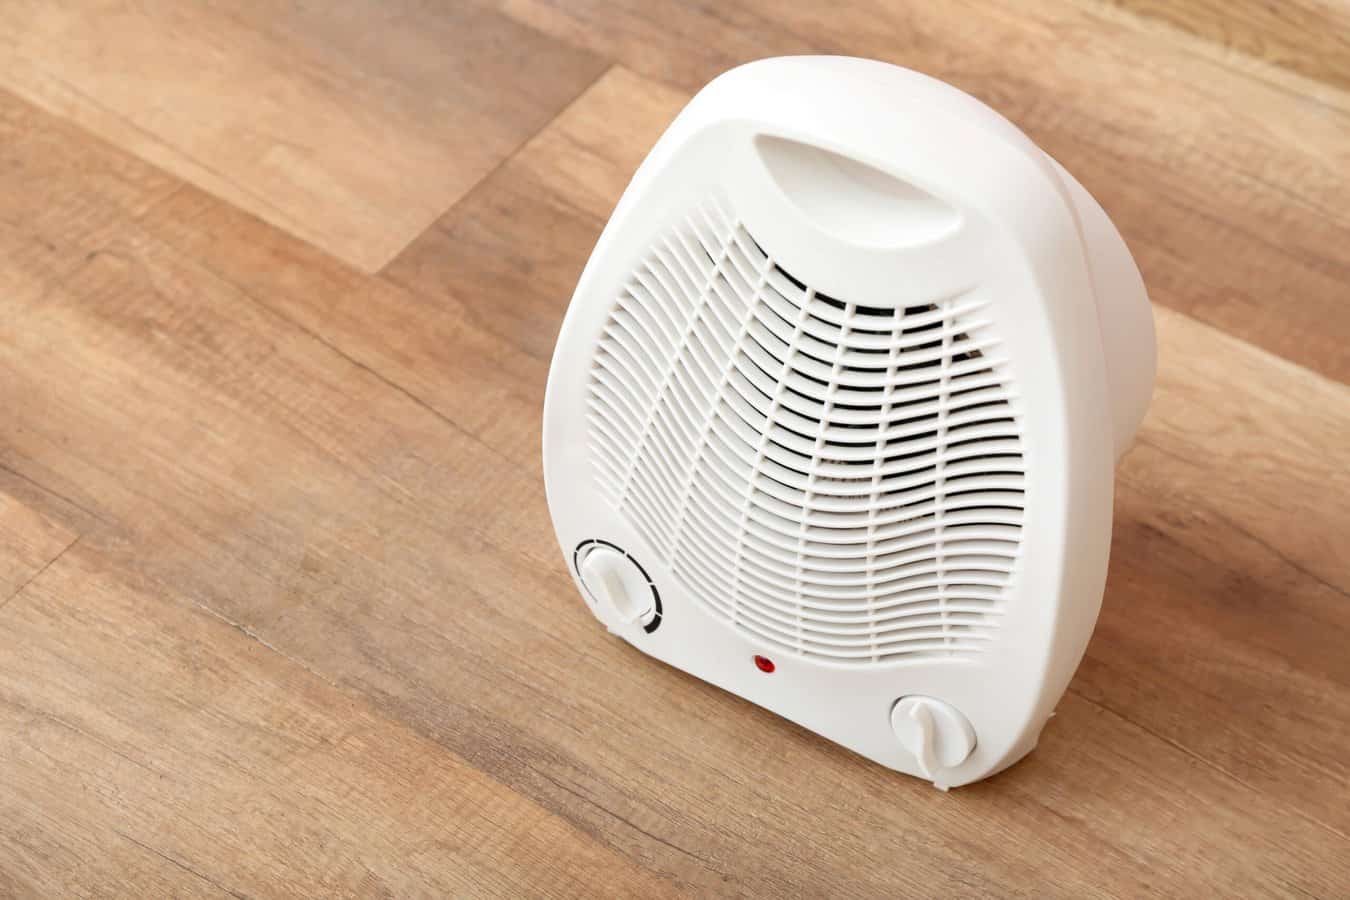 small space heater safety - heater on wood